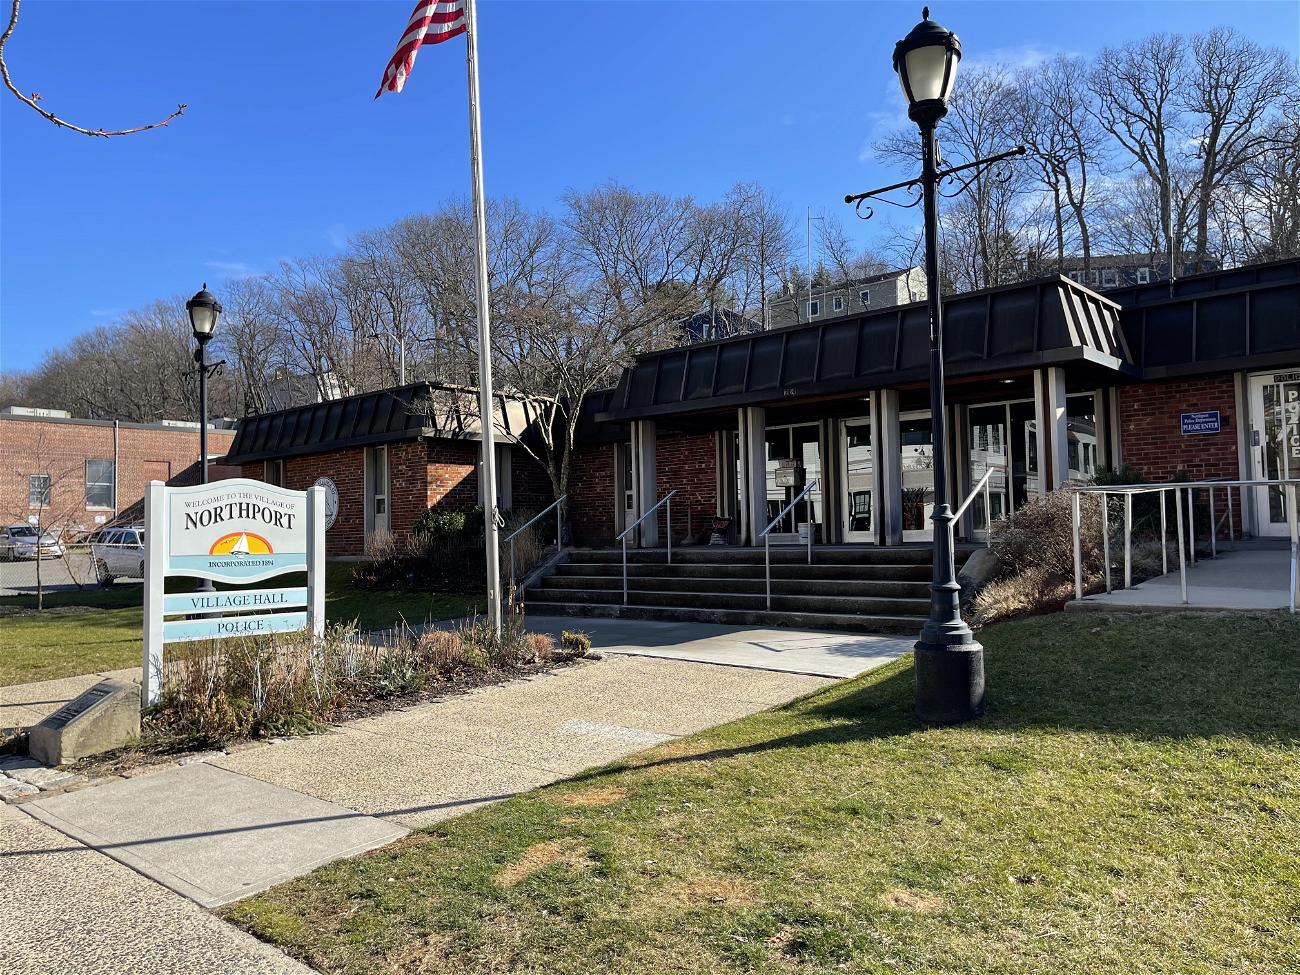 The hiring of a new deputy clerk was announced at the March 20 Northport Village board of trustees meeting. Village court is expected to reopen on April 8.